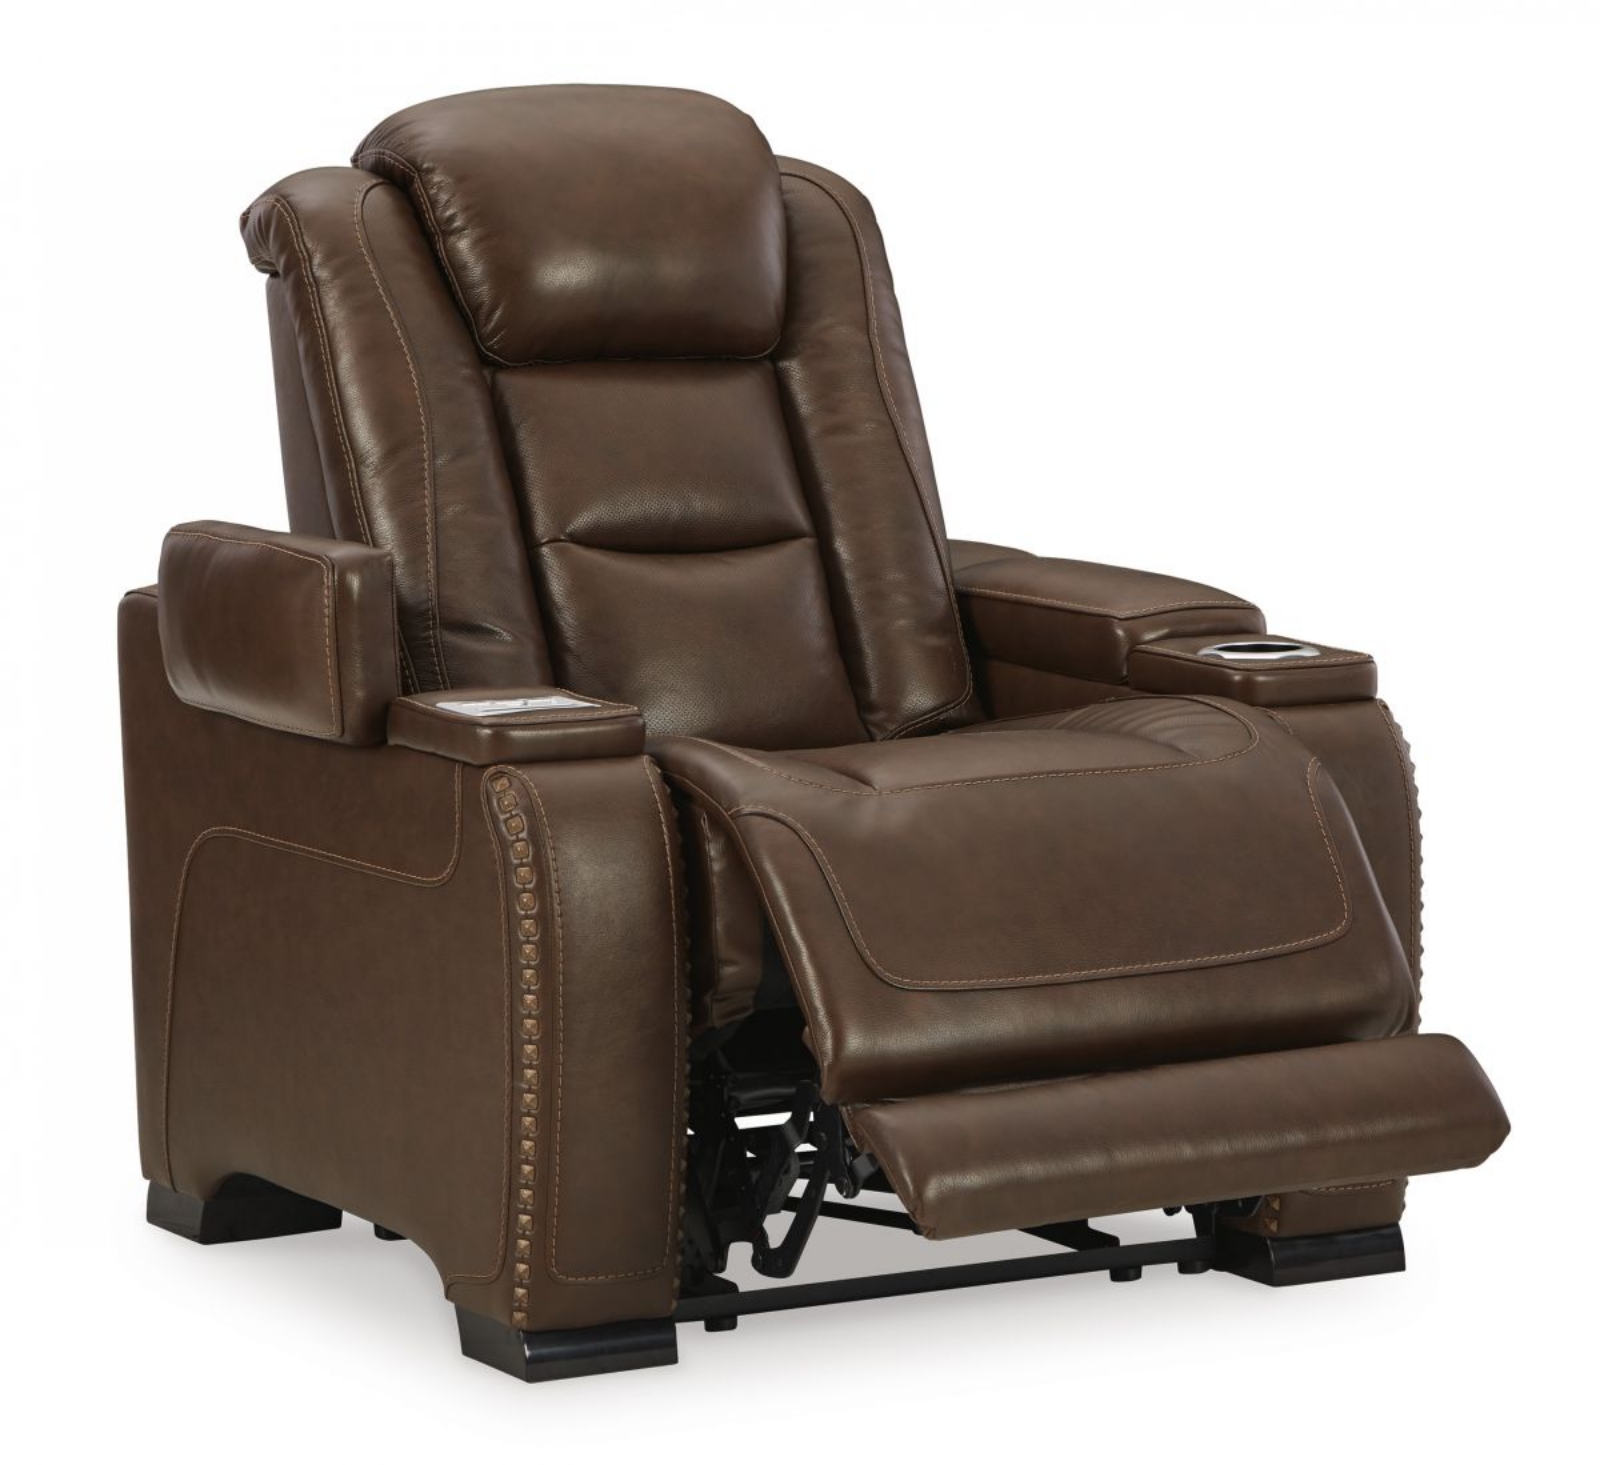 Picture of The Man-Den Power Recliner